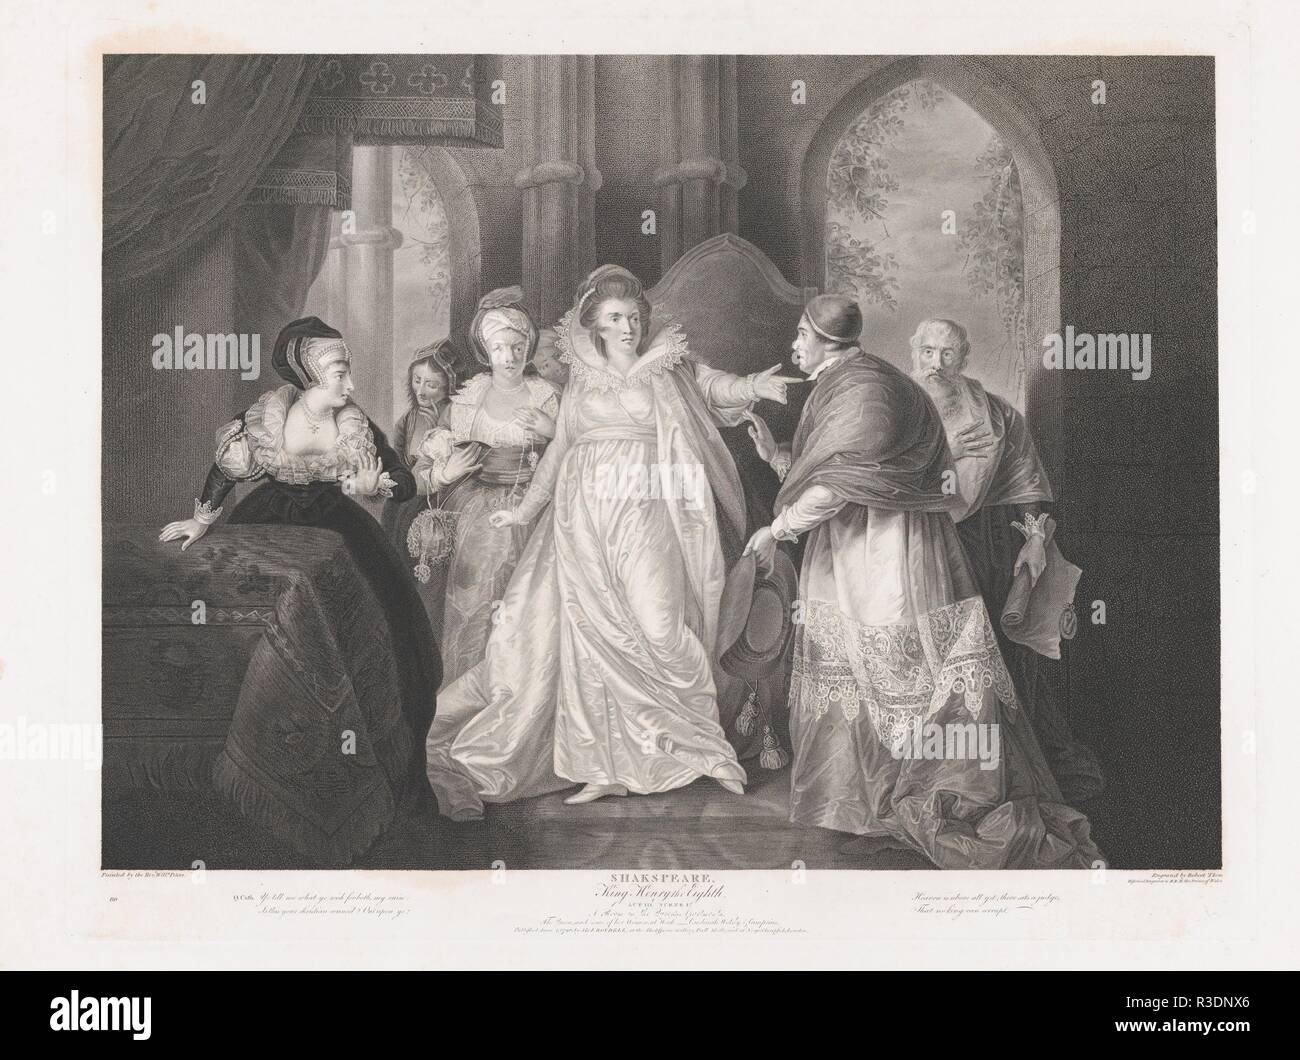 Queen Catherine, Cardinal Wolsey and Cardinal Campeius (Shakespeare, King Henry VIII, Act 3, Scene 1). Artist: After Matthew William Peters (British, Freshwater, Isle of Wight 1742-1814 Brasted, Kent). Dimensions: Plate: 19 1/2 × 25 in. (49.5 × 63.5 cm)  Sheet: 21 7/8 × 27 15/16 in. (55.5 × 70.9 cm). Engraver: Robert Thew (British, Patrington 1758-1802 Stevenage). Publisher: John & Josiah Boydell (British, 1786-1804). Series/Portfolio: Boydell's Shakespeare Gallery. Subject: William Shakespeare (British, Stratford-upon-Avon 1564-1616 Stratford-upon-Avon). Date: 1796. Museum: Metropolitan Museu Stock Photo